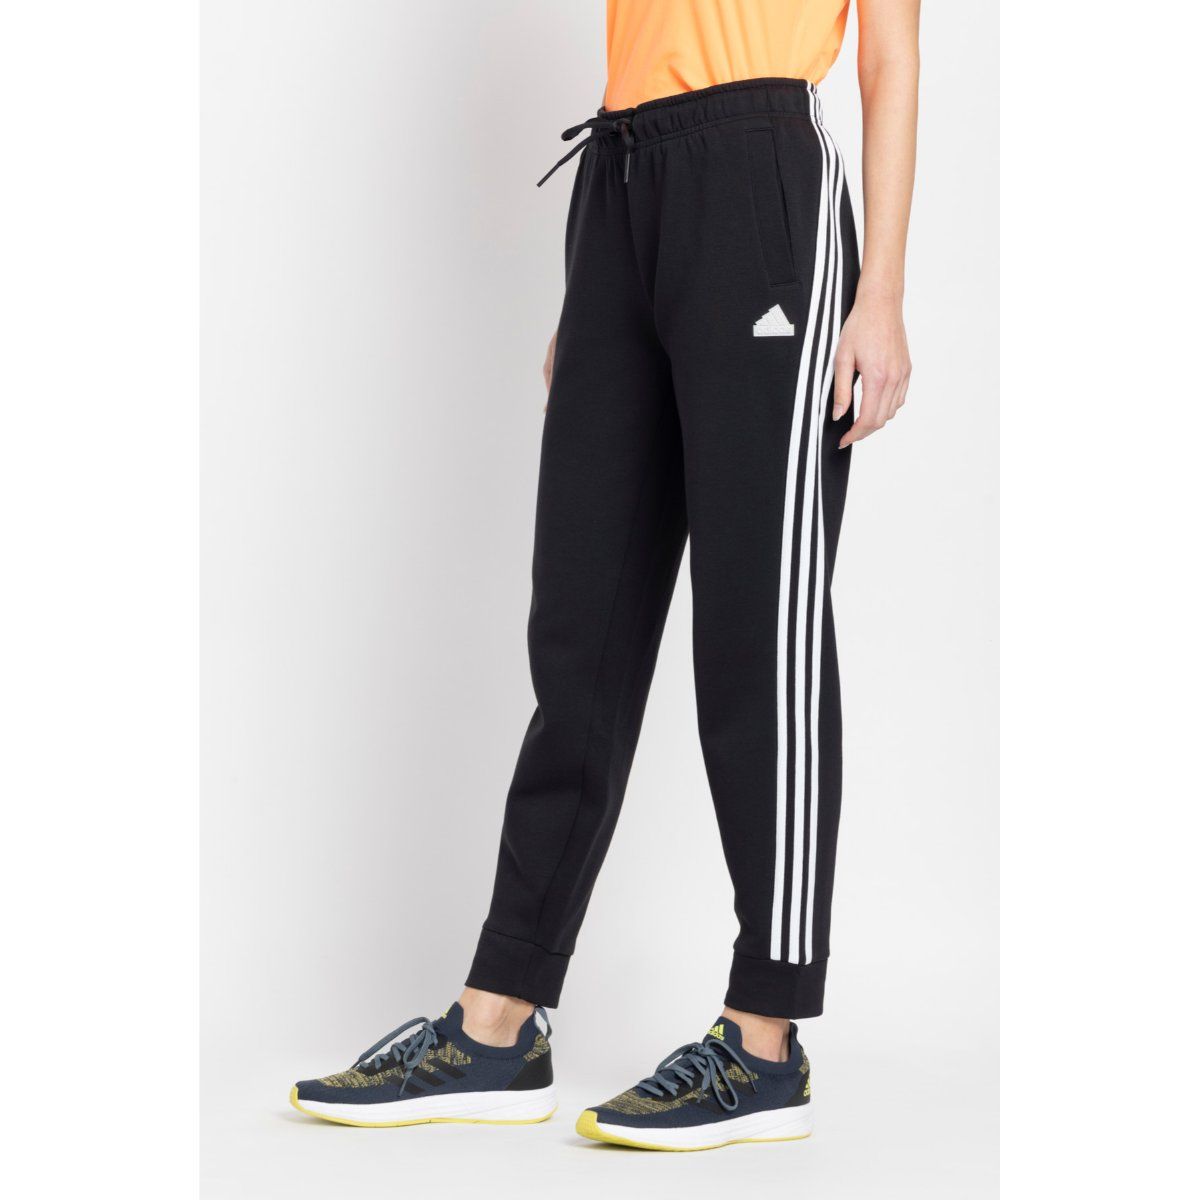 adidas Women W FI 3S REG PNT Black Sports Track Pants Buy adidas Women W  FI 3S REG PNT Black Sports Track Pants Online at Best Price in India  Nykaa